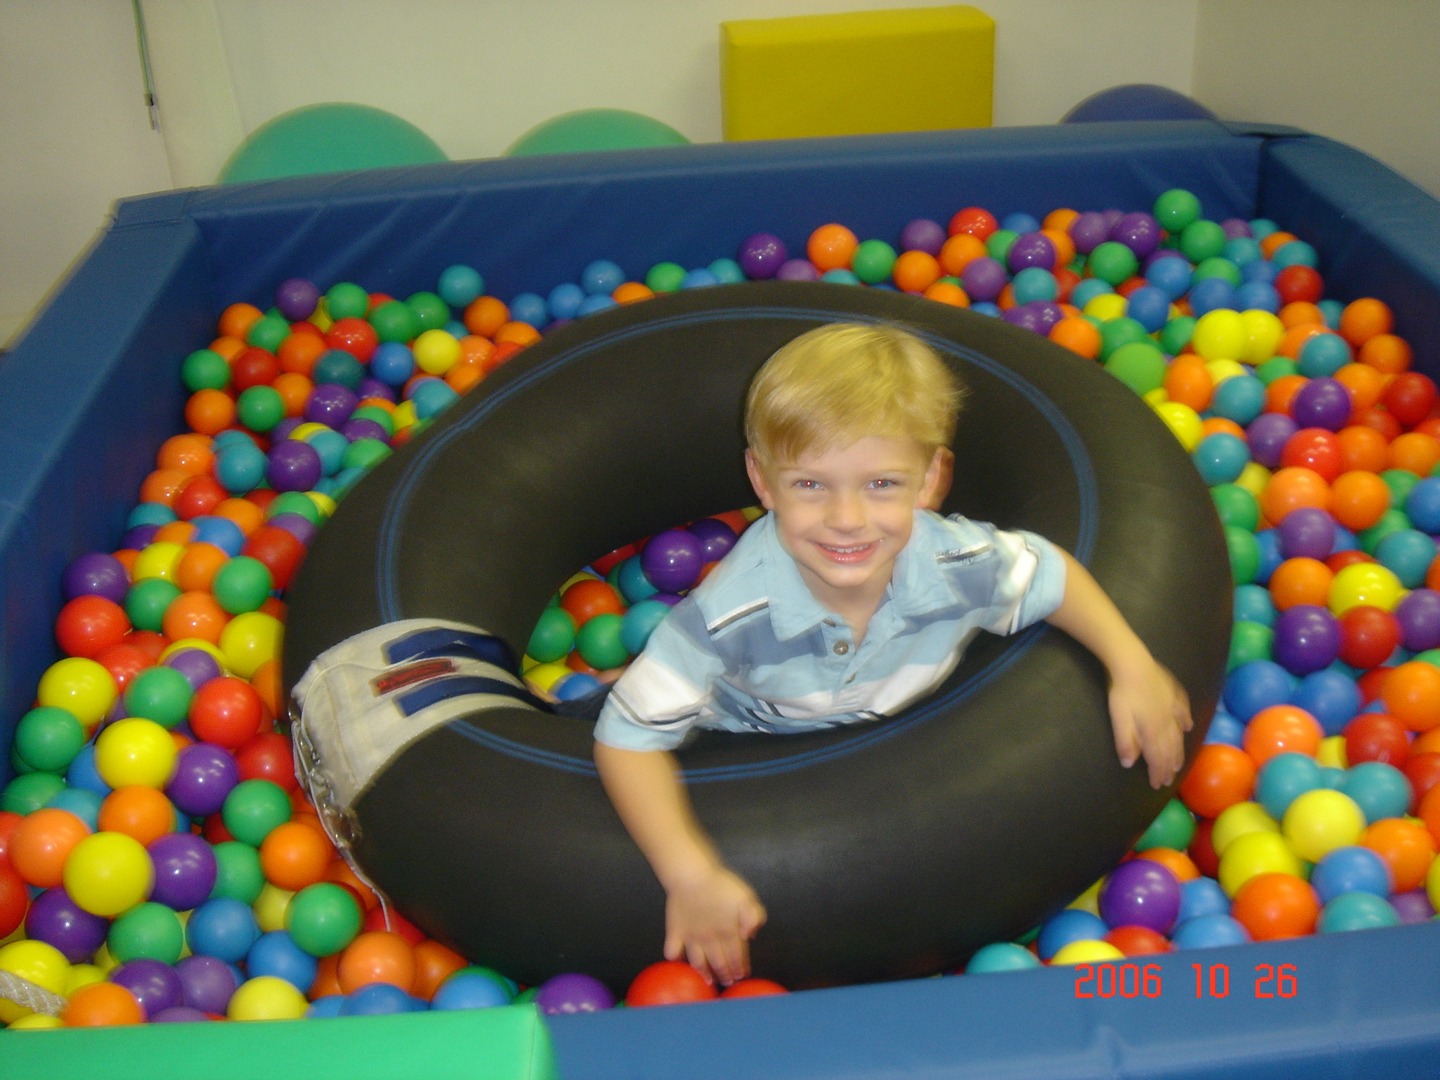 A boy in a pool of balls with an inner tube.